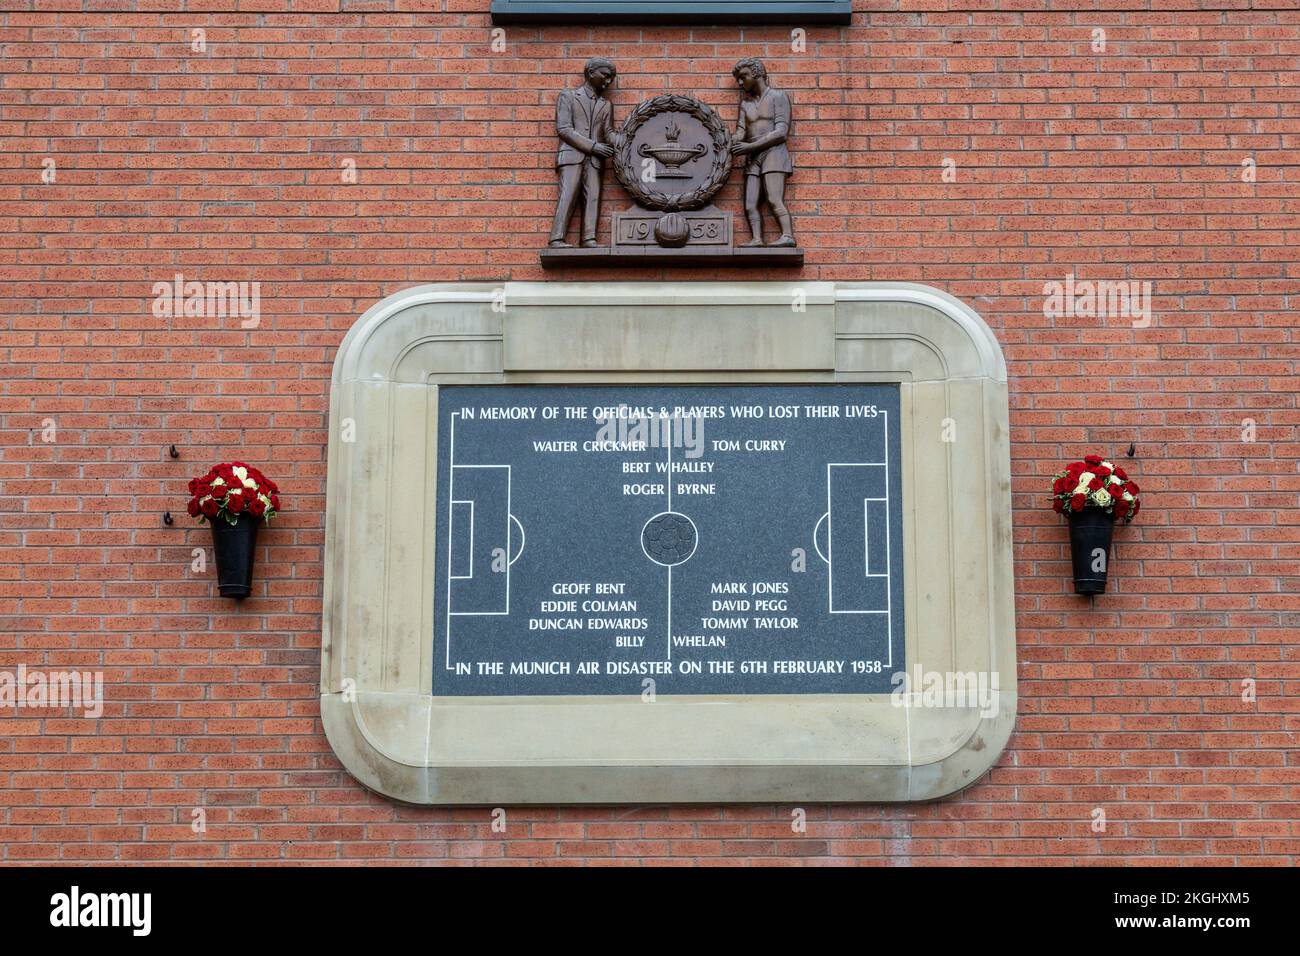 Tribute To The Players That Died In The Munich Air Disaster On 6 February 1958 At Manchester 4250